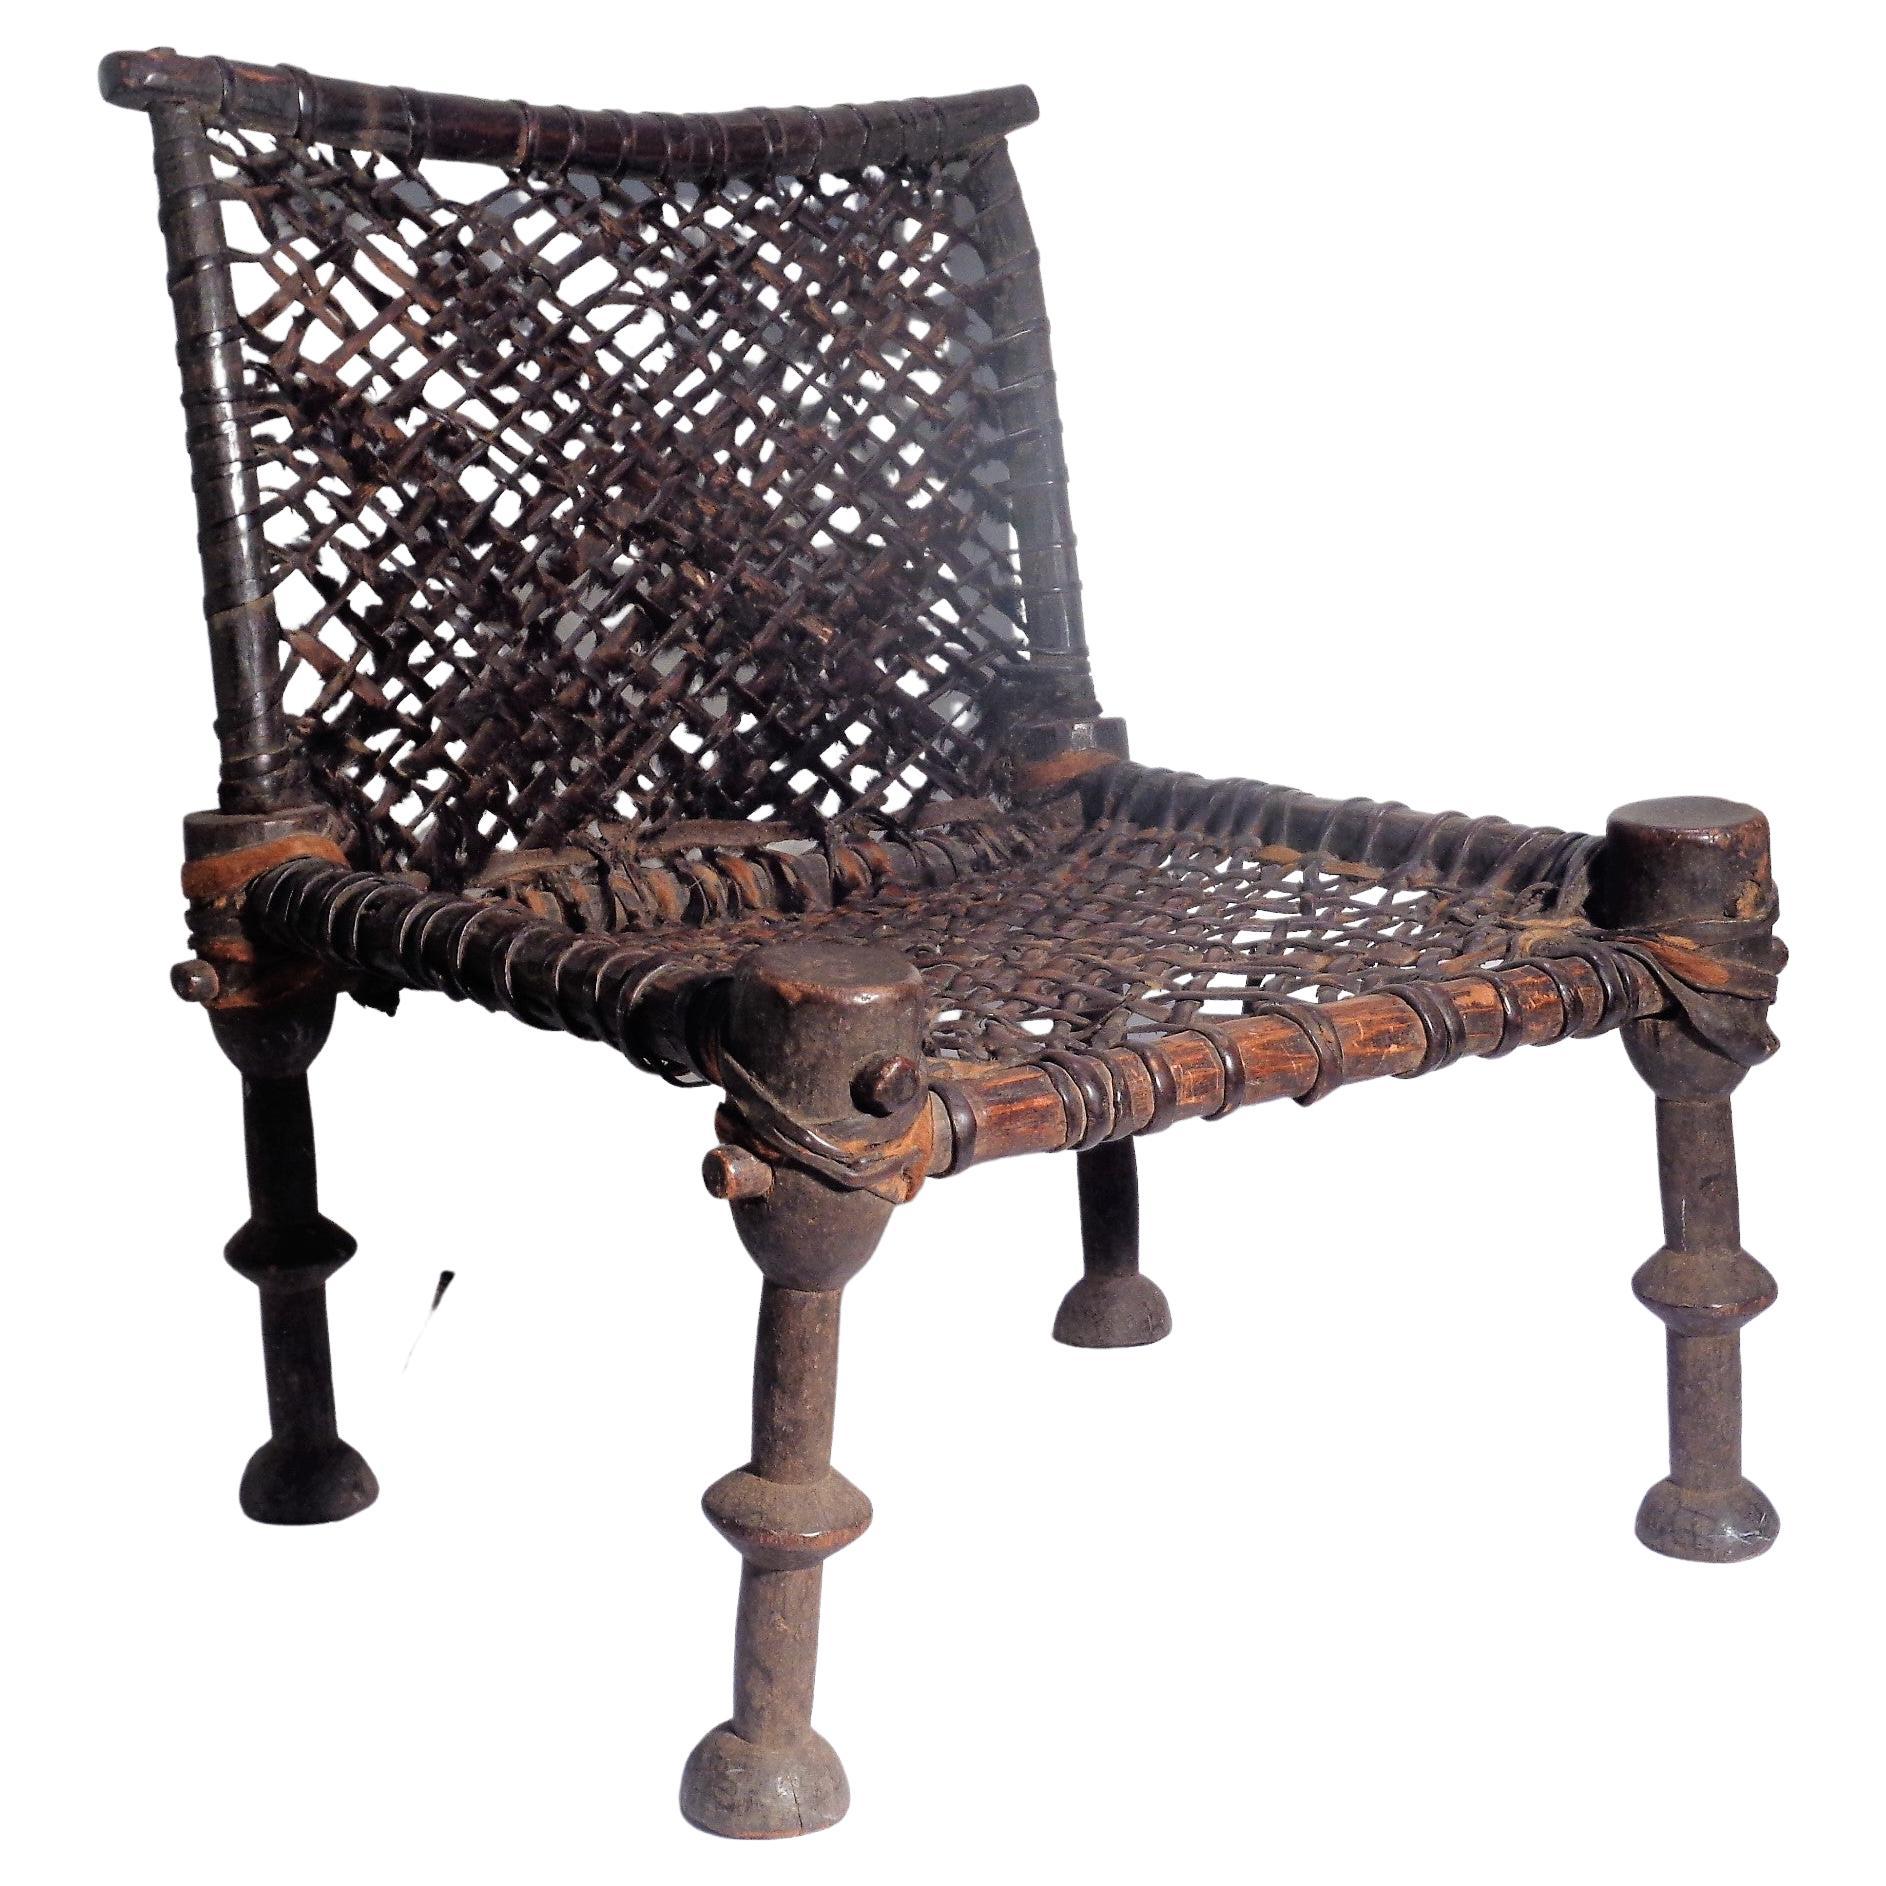 19th century African hand carved wood chair w/ leather goatskin hide woven webbing in original as found antique condition with no restorations. Overall beautifully aged color patina. Look at all pictures and read condition report in comment section.